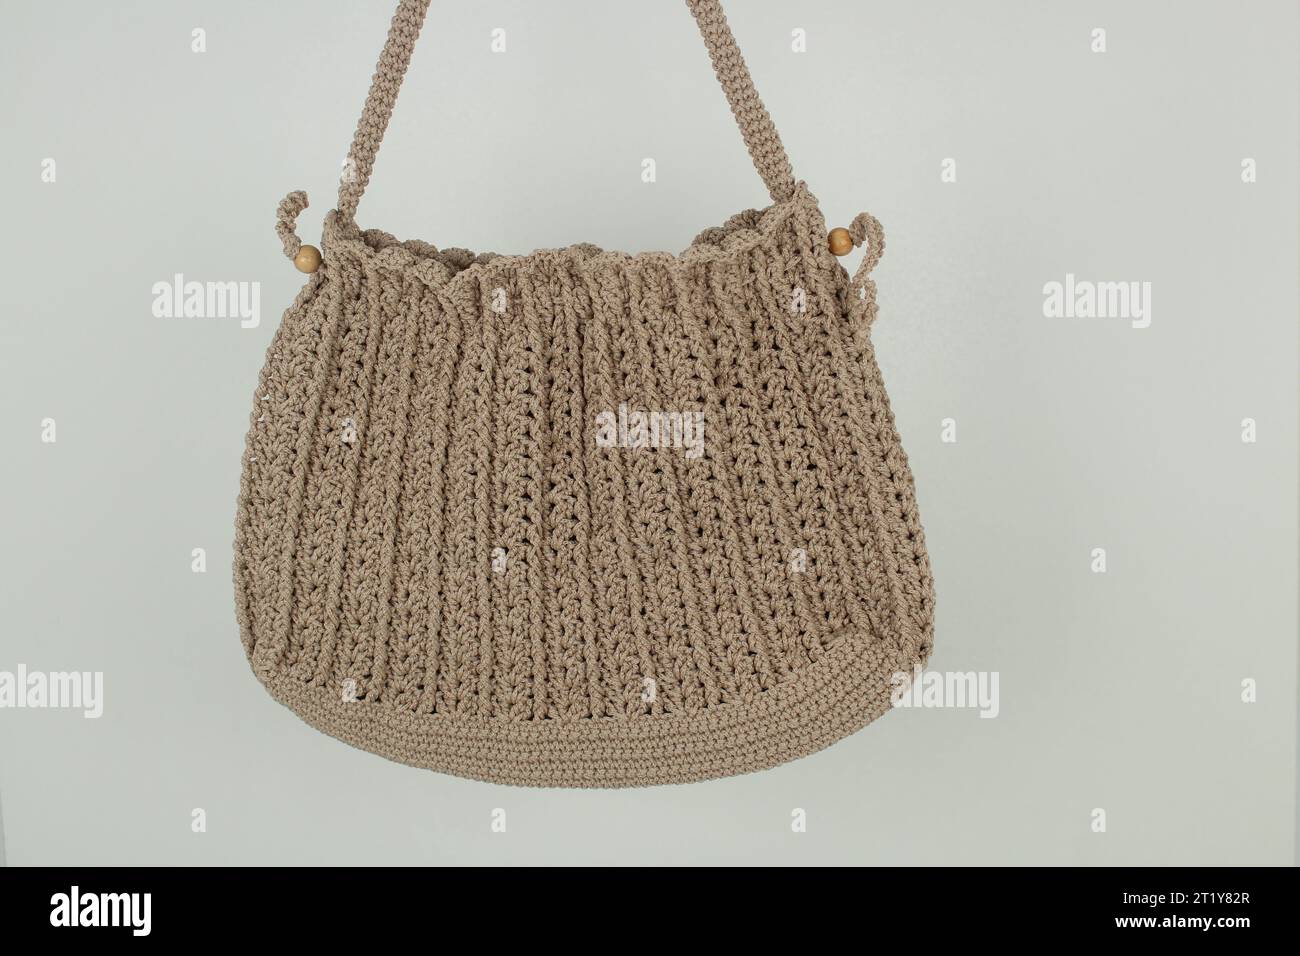 Knitted handmade milky brown bag isolated on white background. Stock Photo